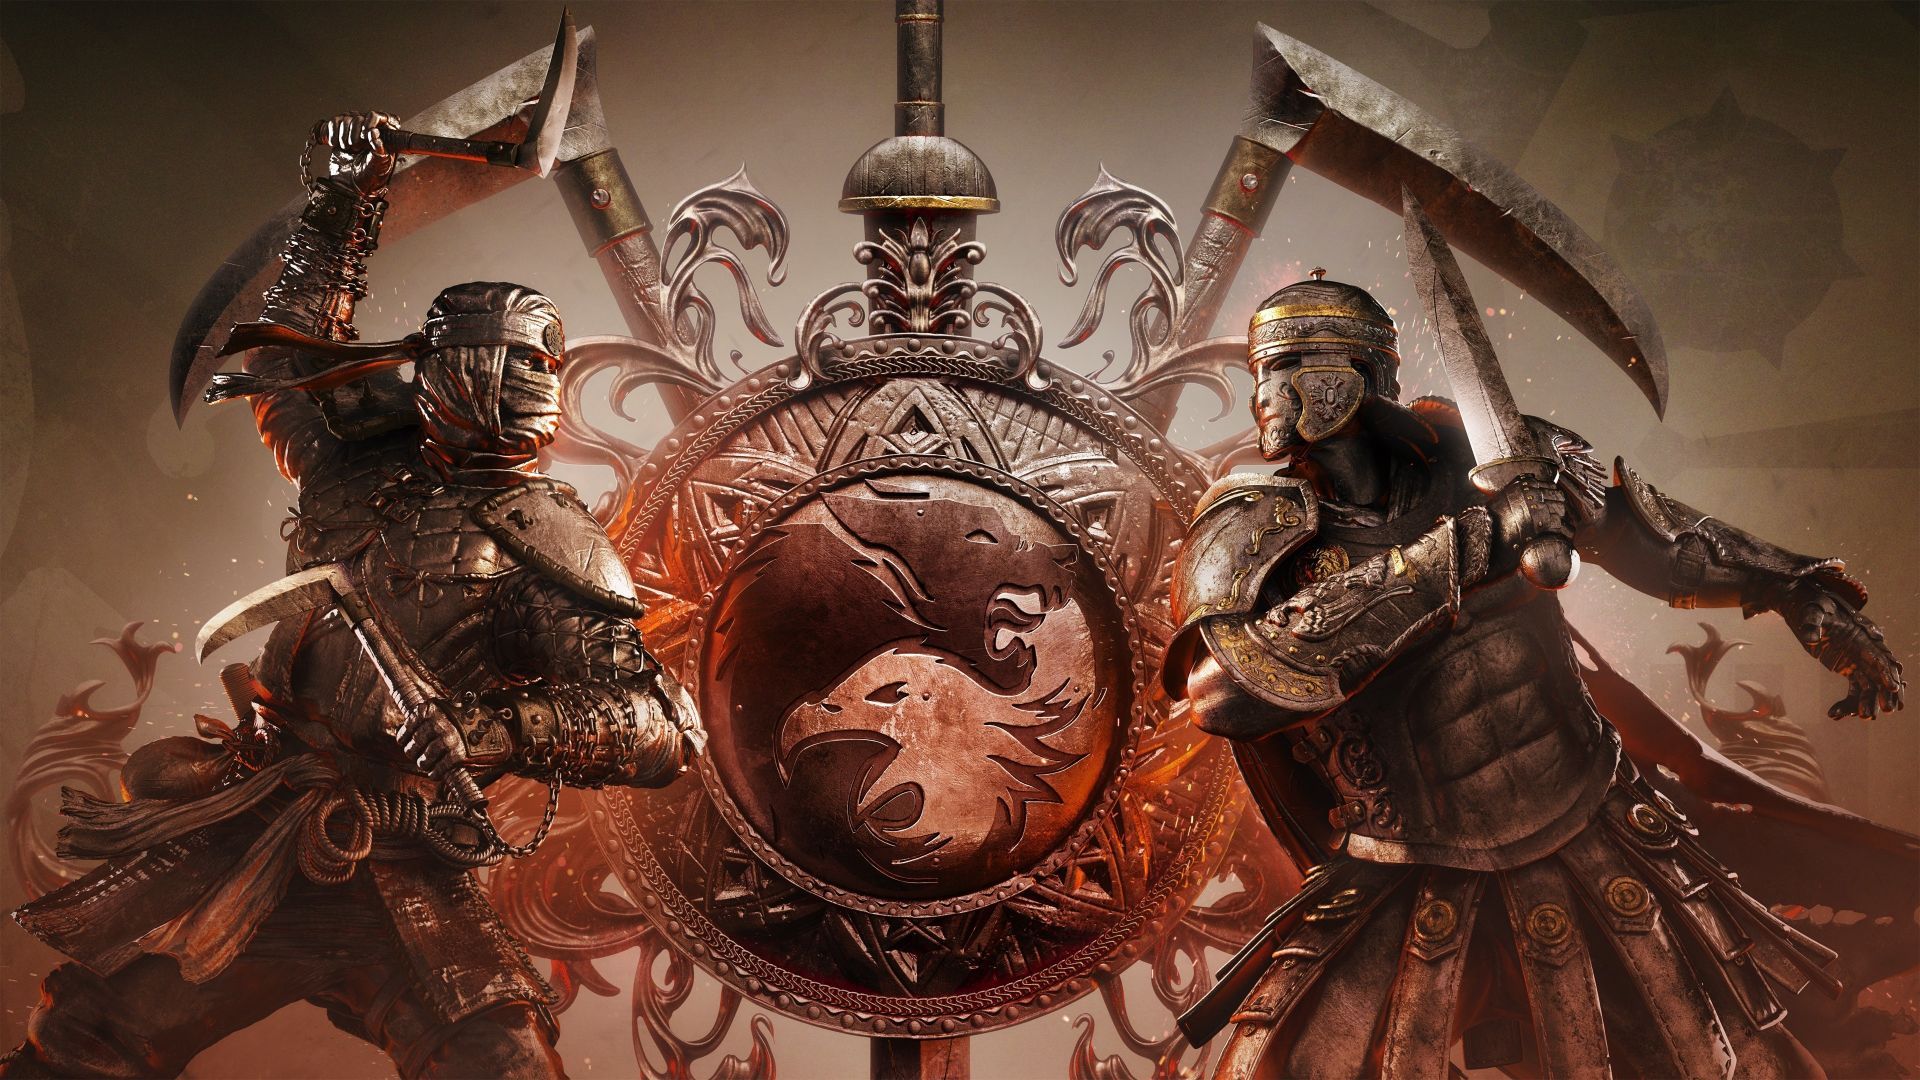 Desktop wallpaper warriors, for honor, video game, swords and shield, HD image, picture, background, 6682a0